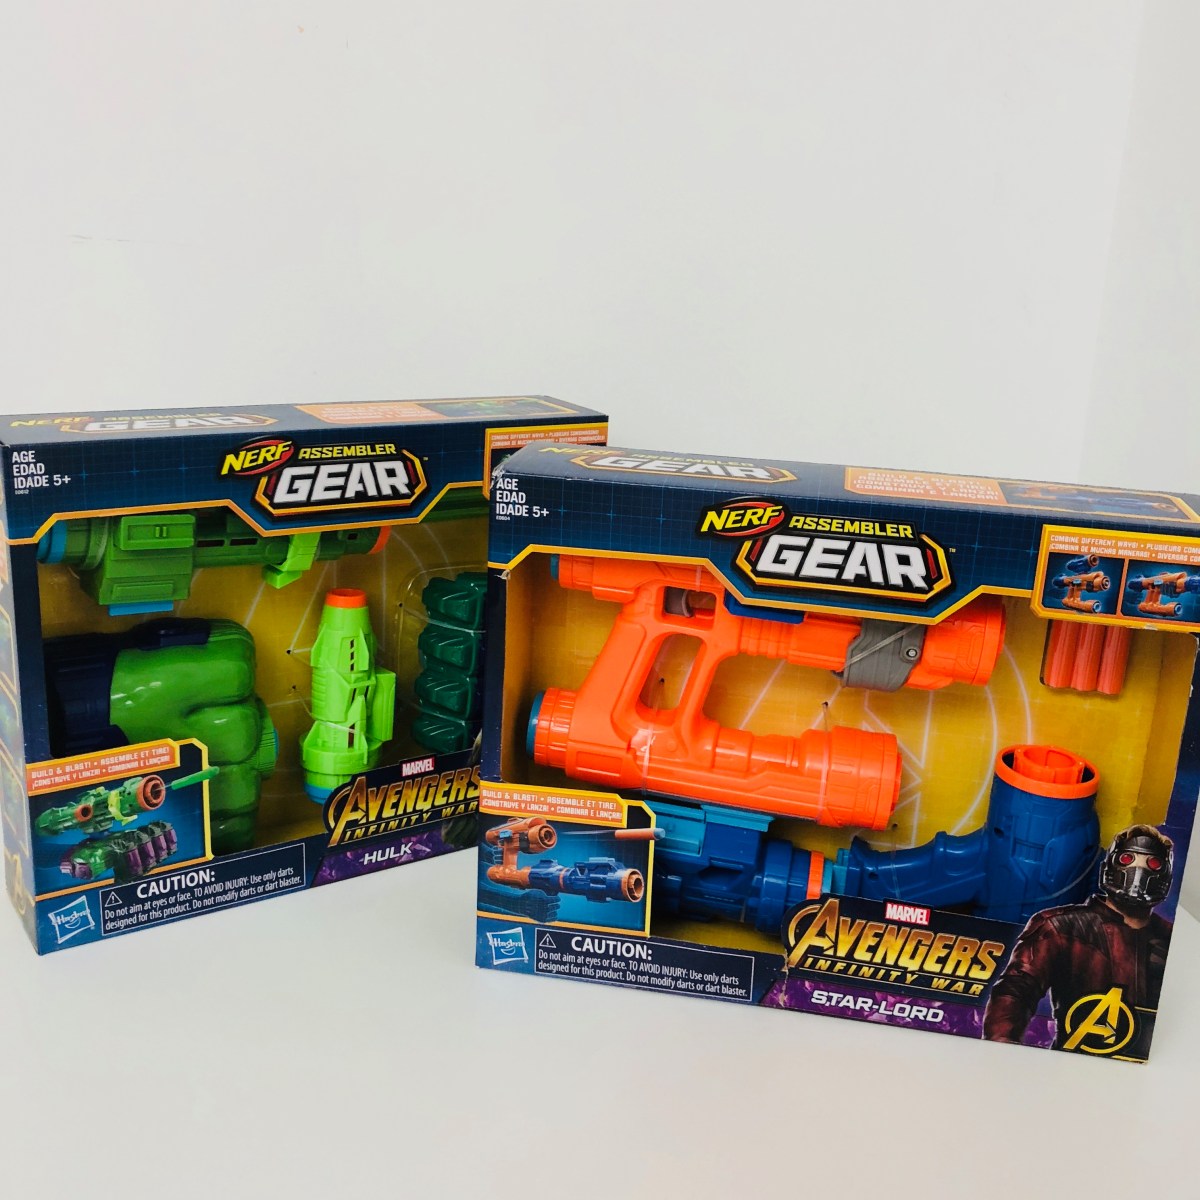 Avengers Infinity War Hulk and Star-Lord Nerf sets